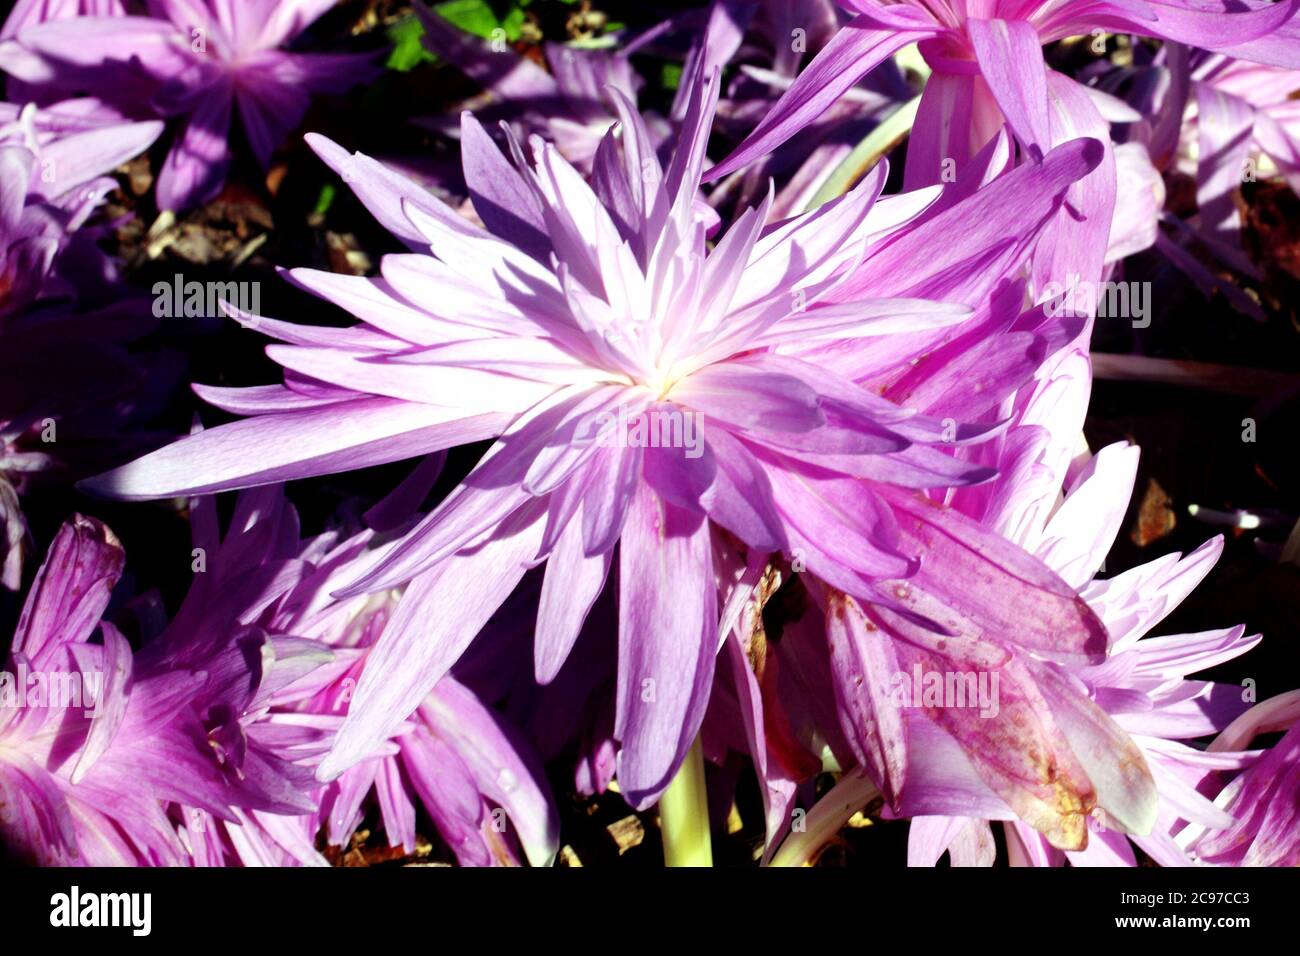 Colchicum autumnale 'Waterlilly' an autumn fall flowering bulb plant commonly known as Autumn Crocus stock photo Stock Photo